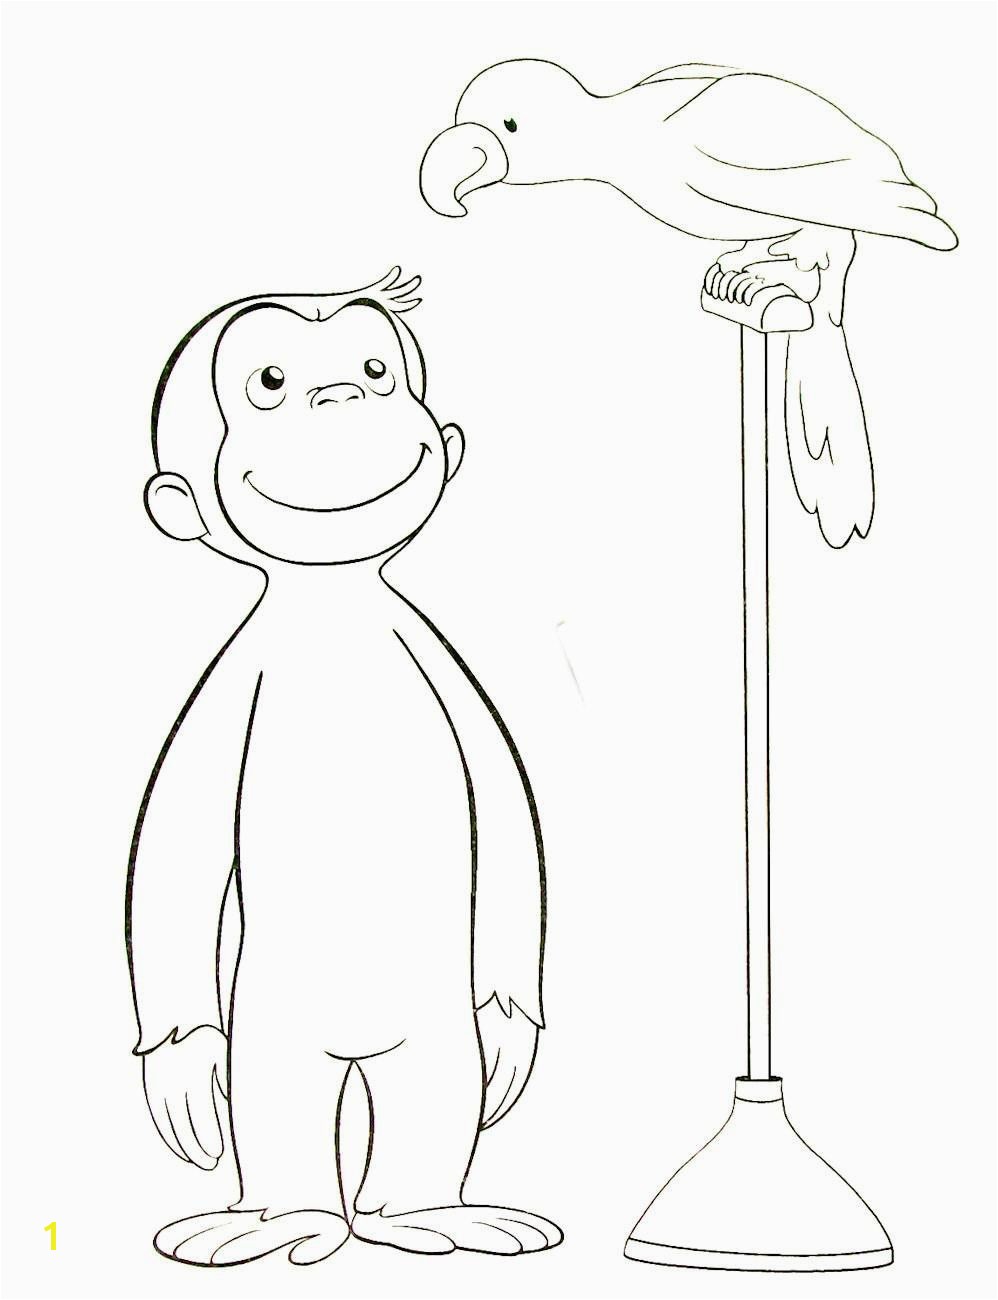 Curious George Printables Coloring Pages Curious George Printable Coloring Book Page for Kids